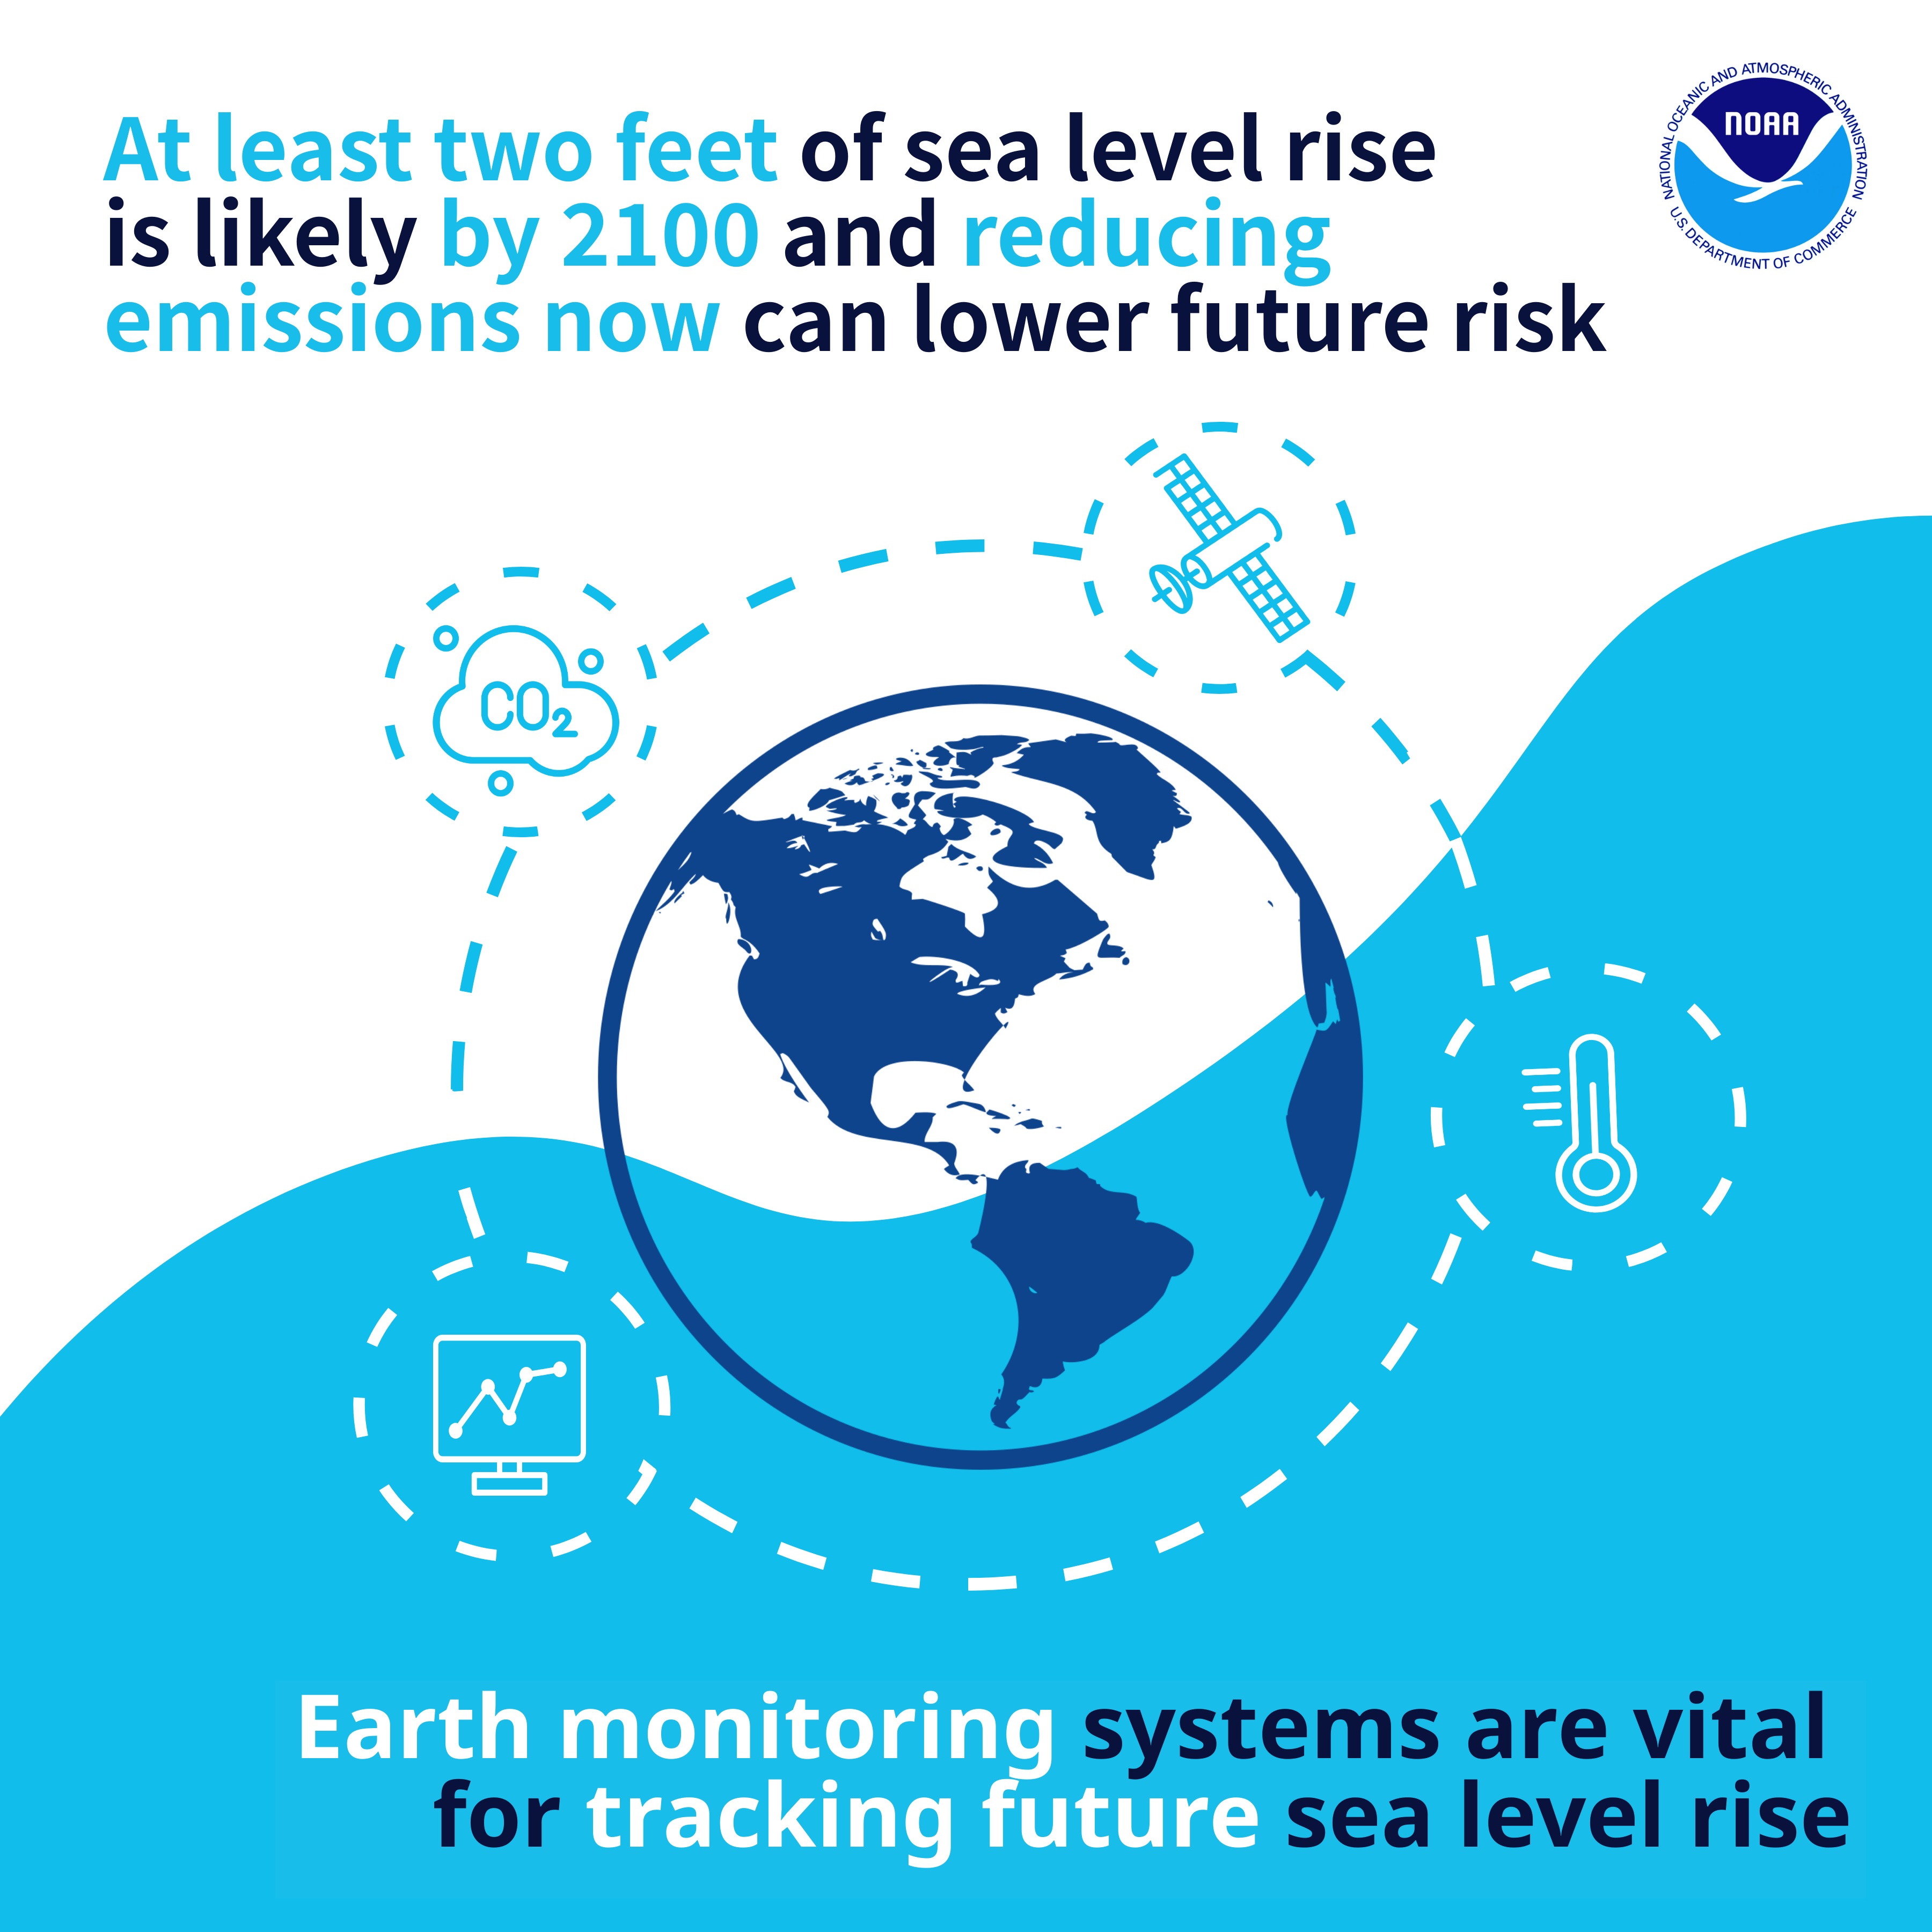 This infographic shows that At least two feet of sea level rise is likely by 2100 and reducing emissions now can lower future risk. Earth-monitoring systems are vital for tracking future sea level rise.